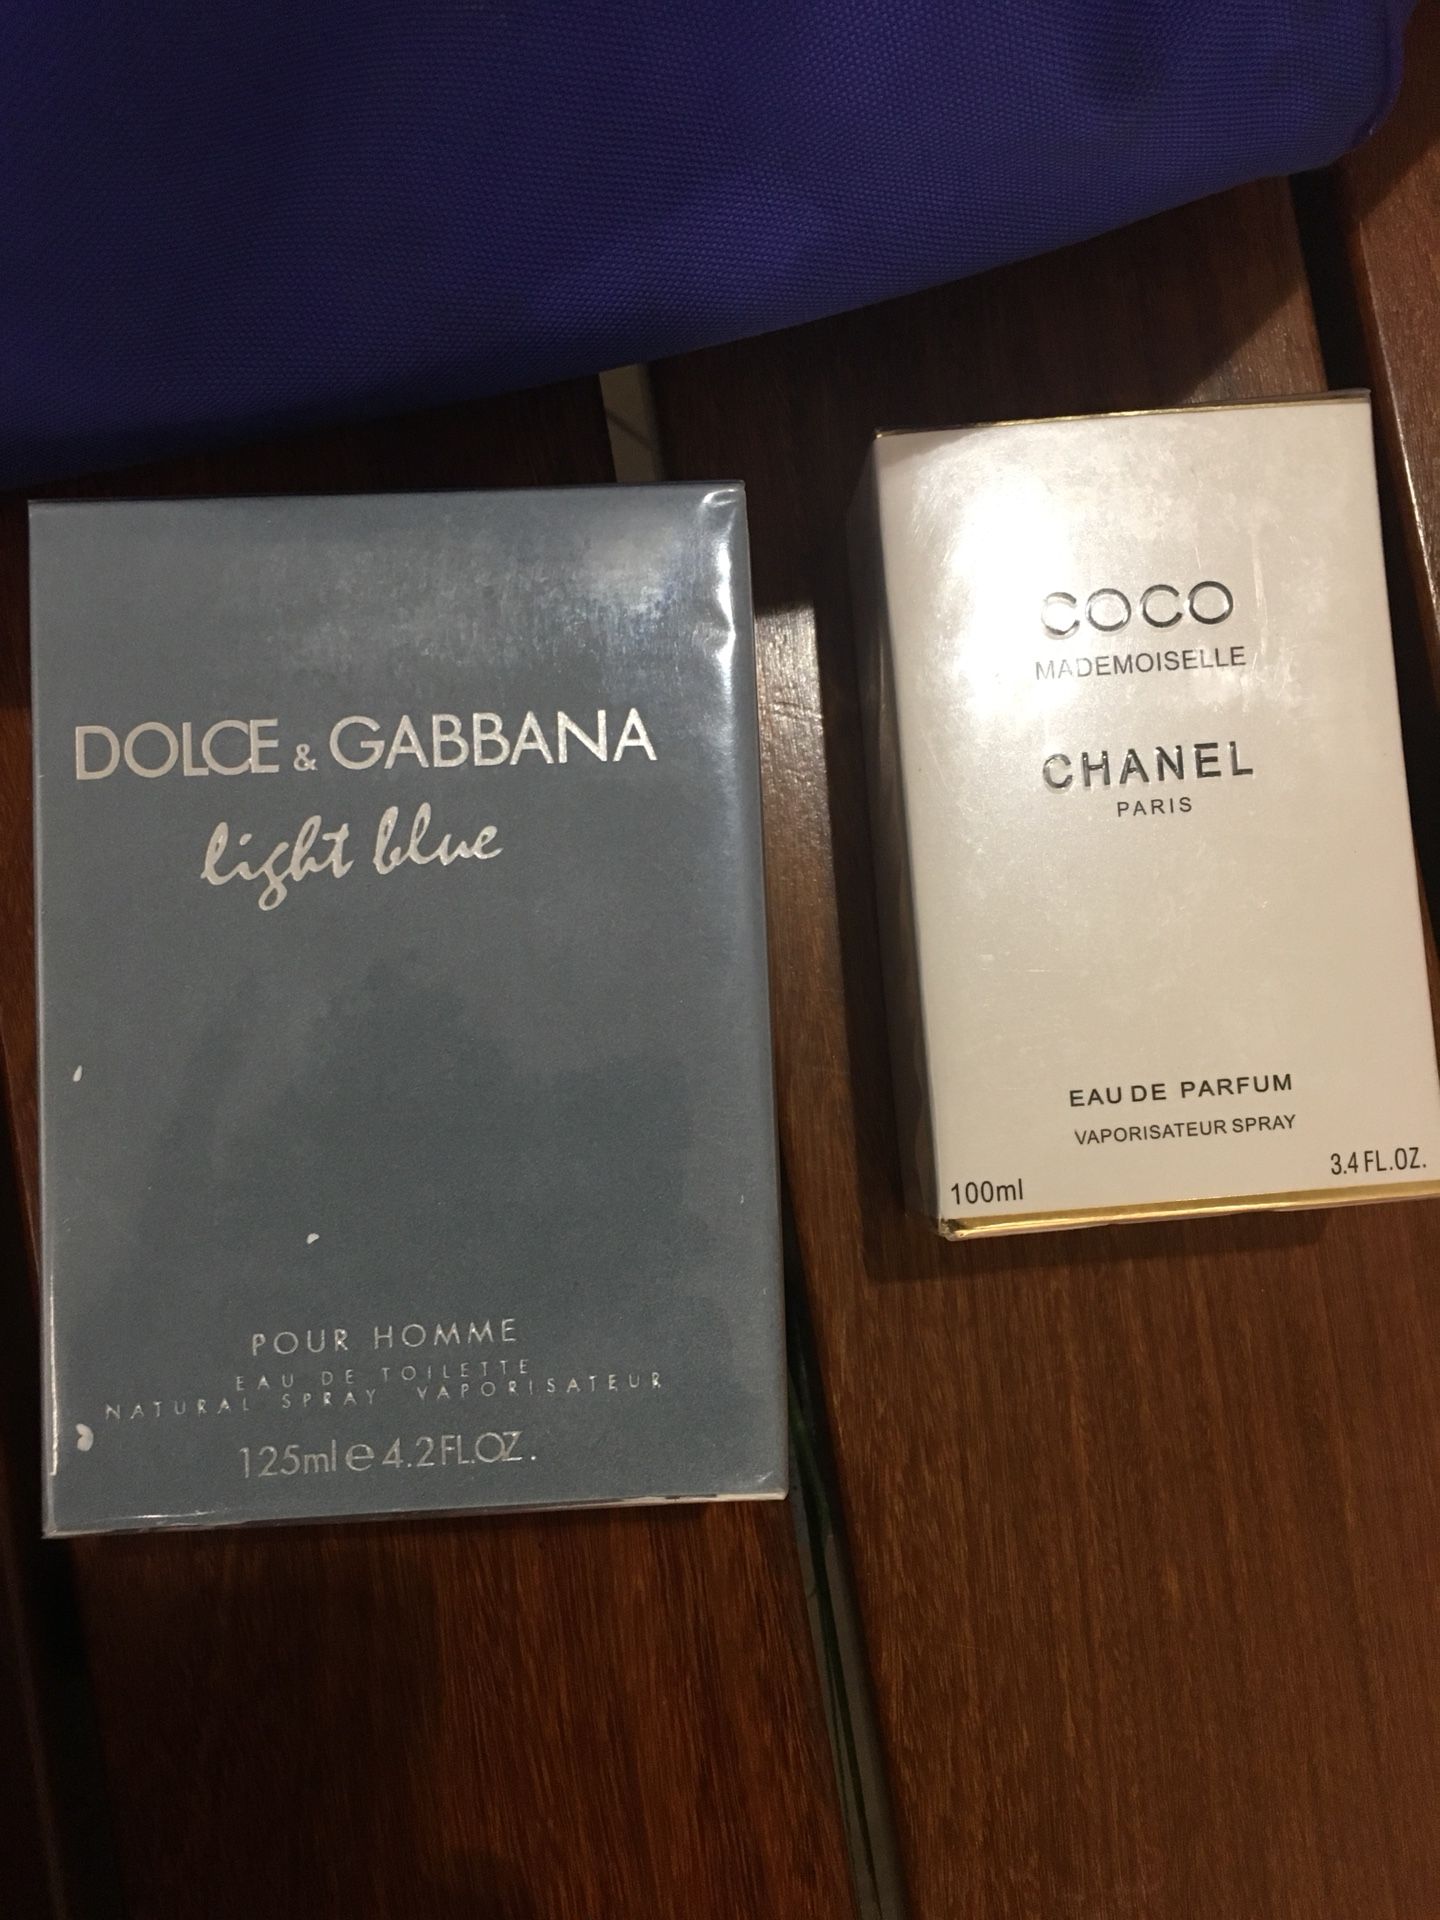 Chanel and Doloce Gabbana special